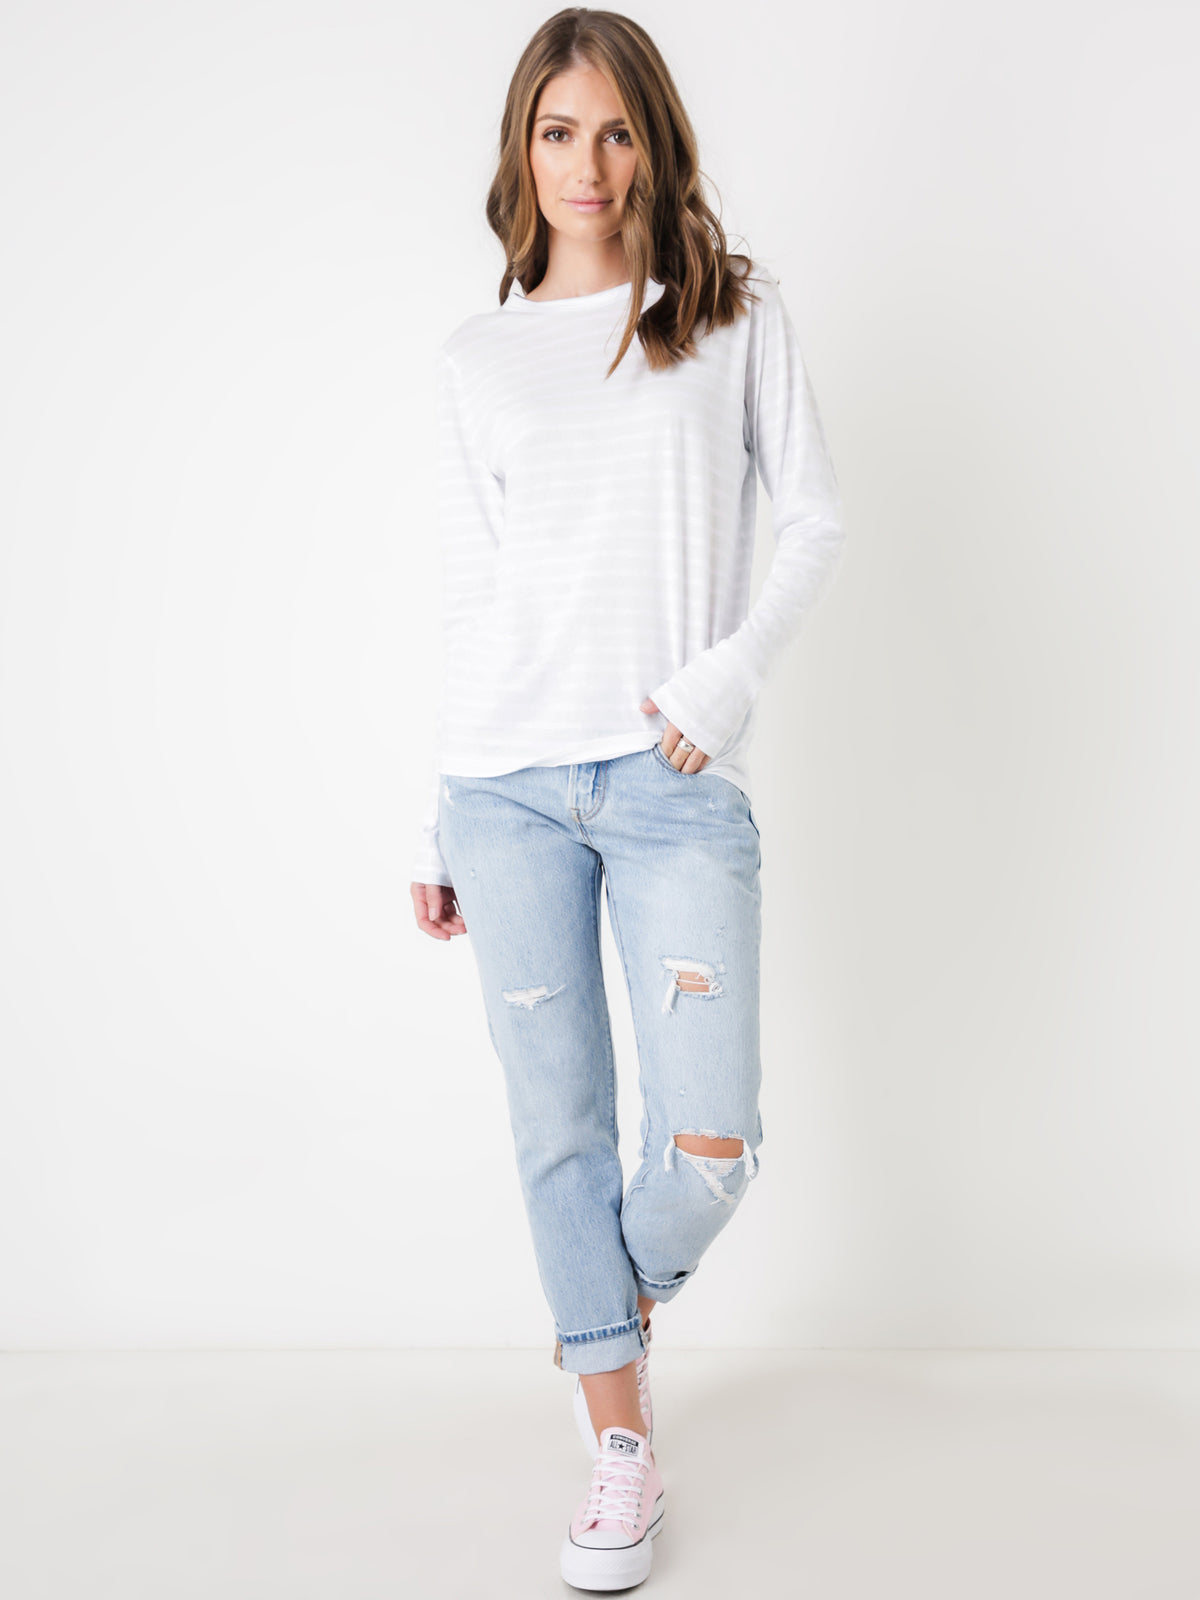 Haraway Long Sleeve T-Shirt in Ice &amp; White Stripe